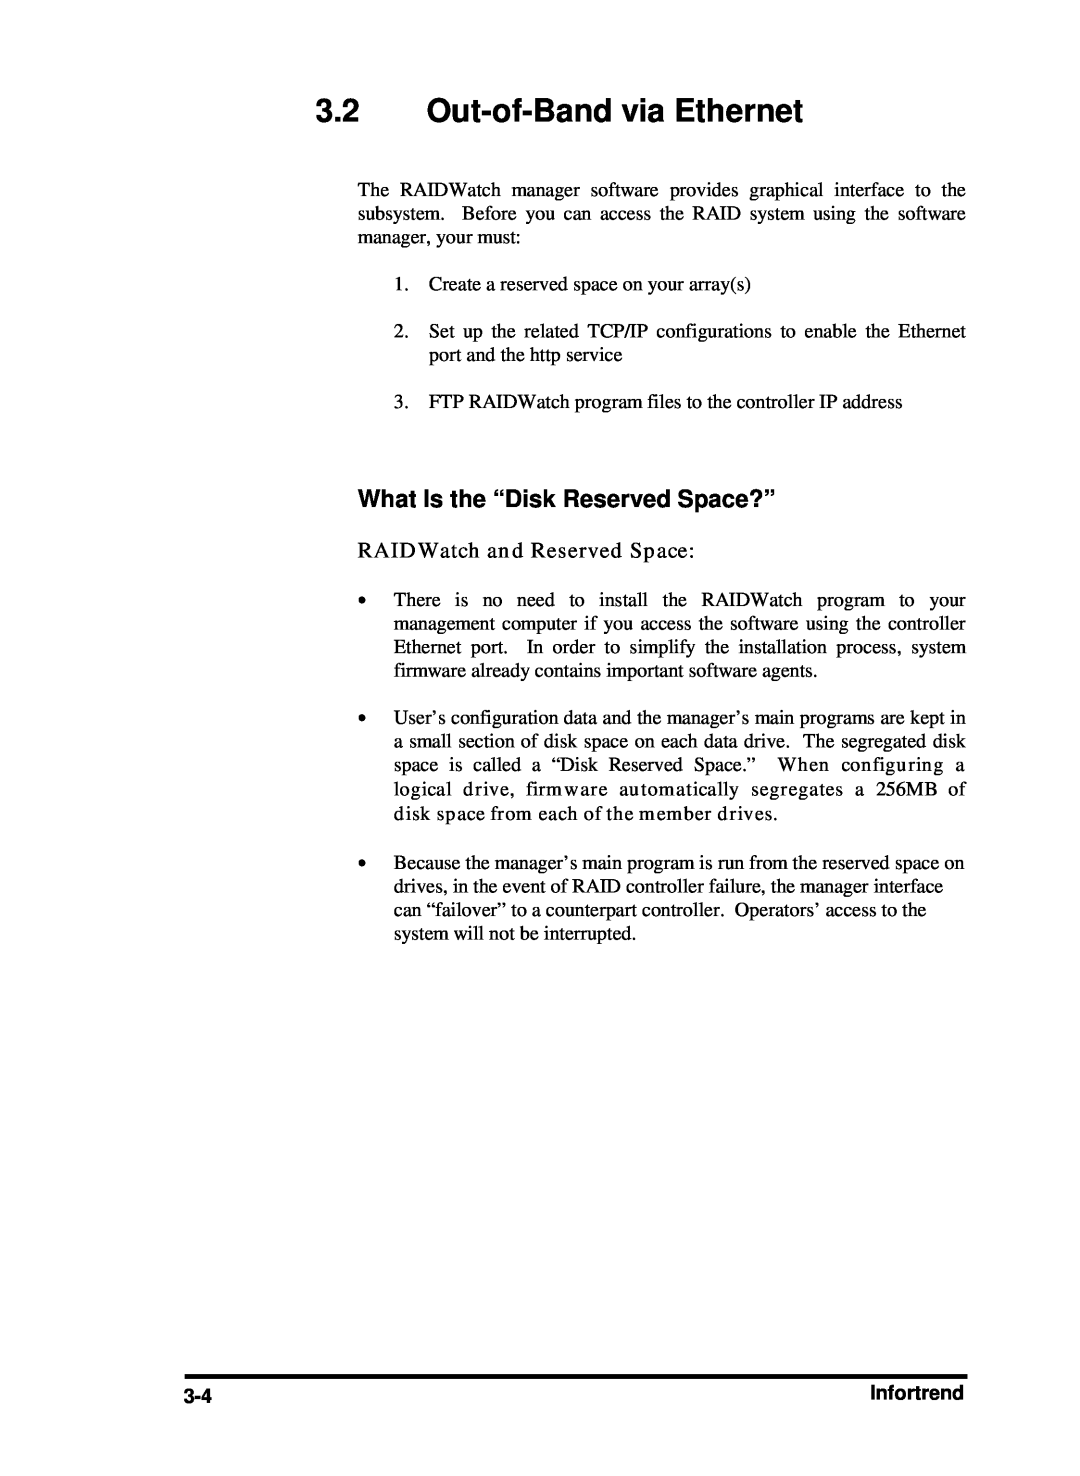 Compaq Infortrend manual Out-of-Band via Ethernet, What Is the “Disk Reserved Space?”, RAIDWatch and Reserved Space 